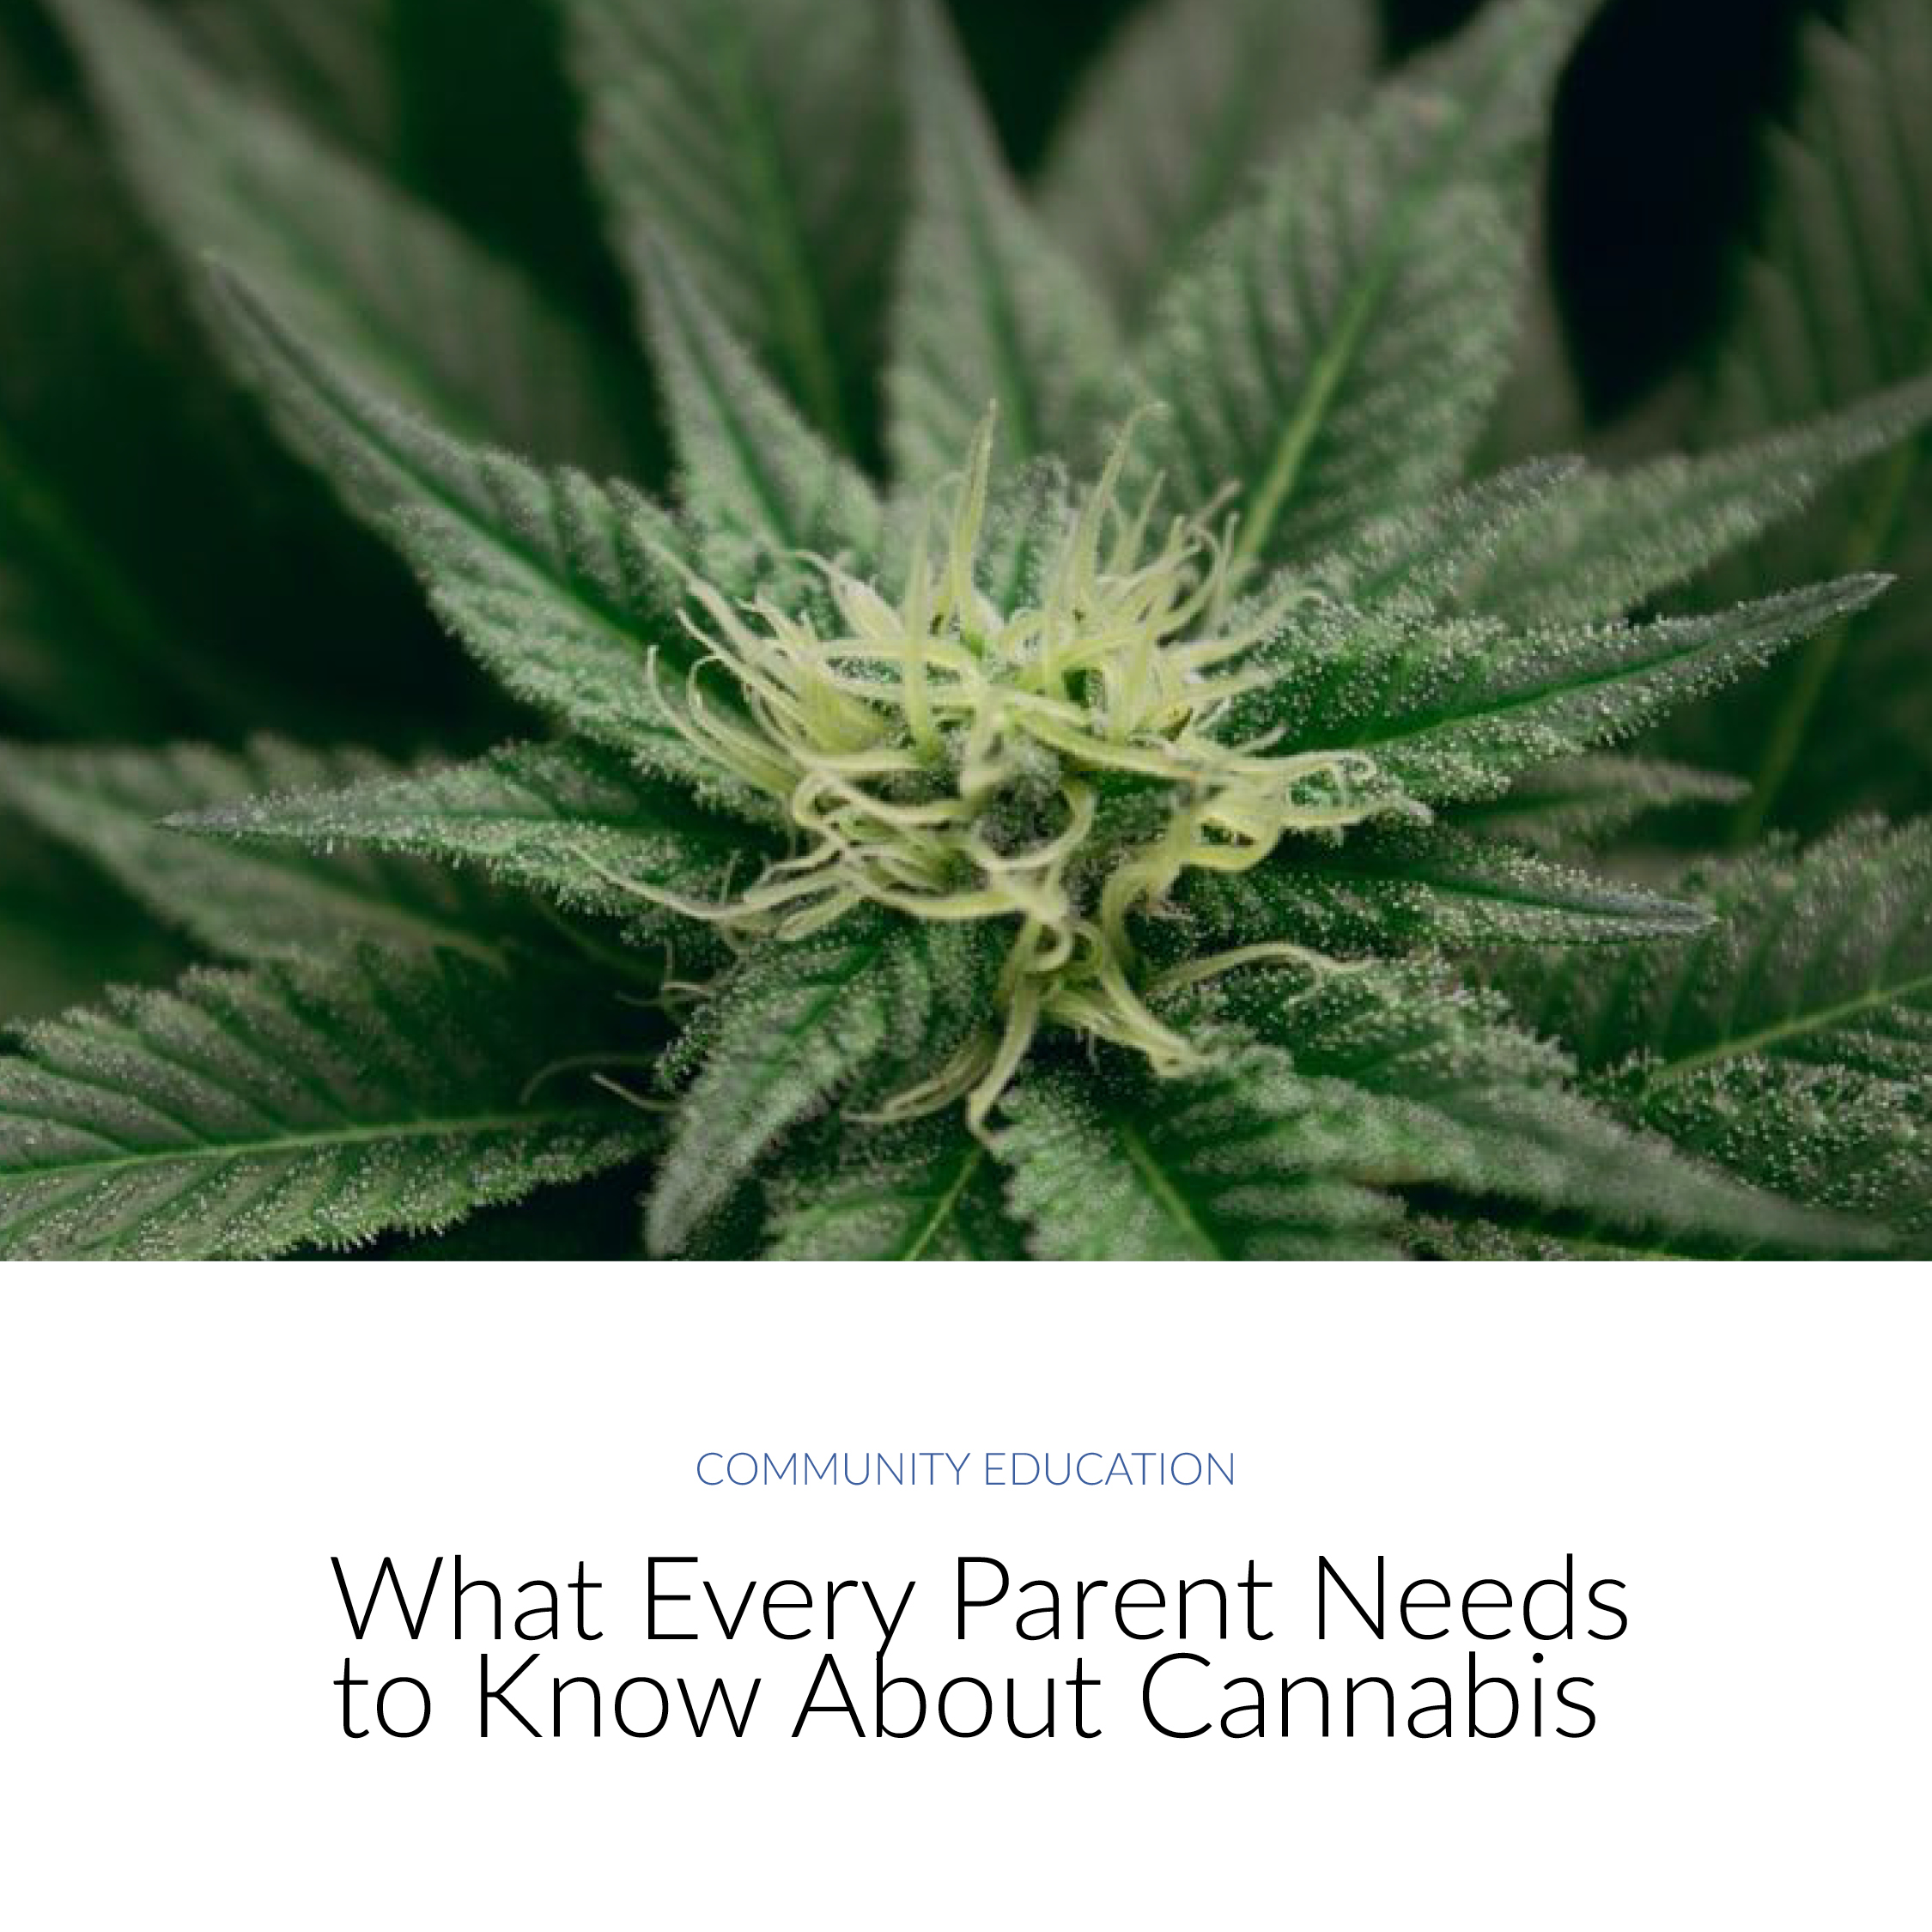 What every parent needs to know about cannabis